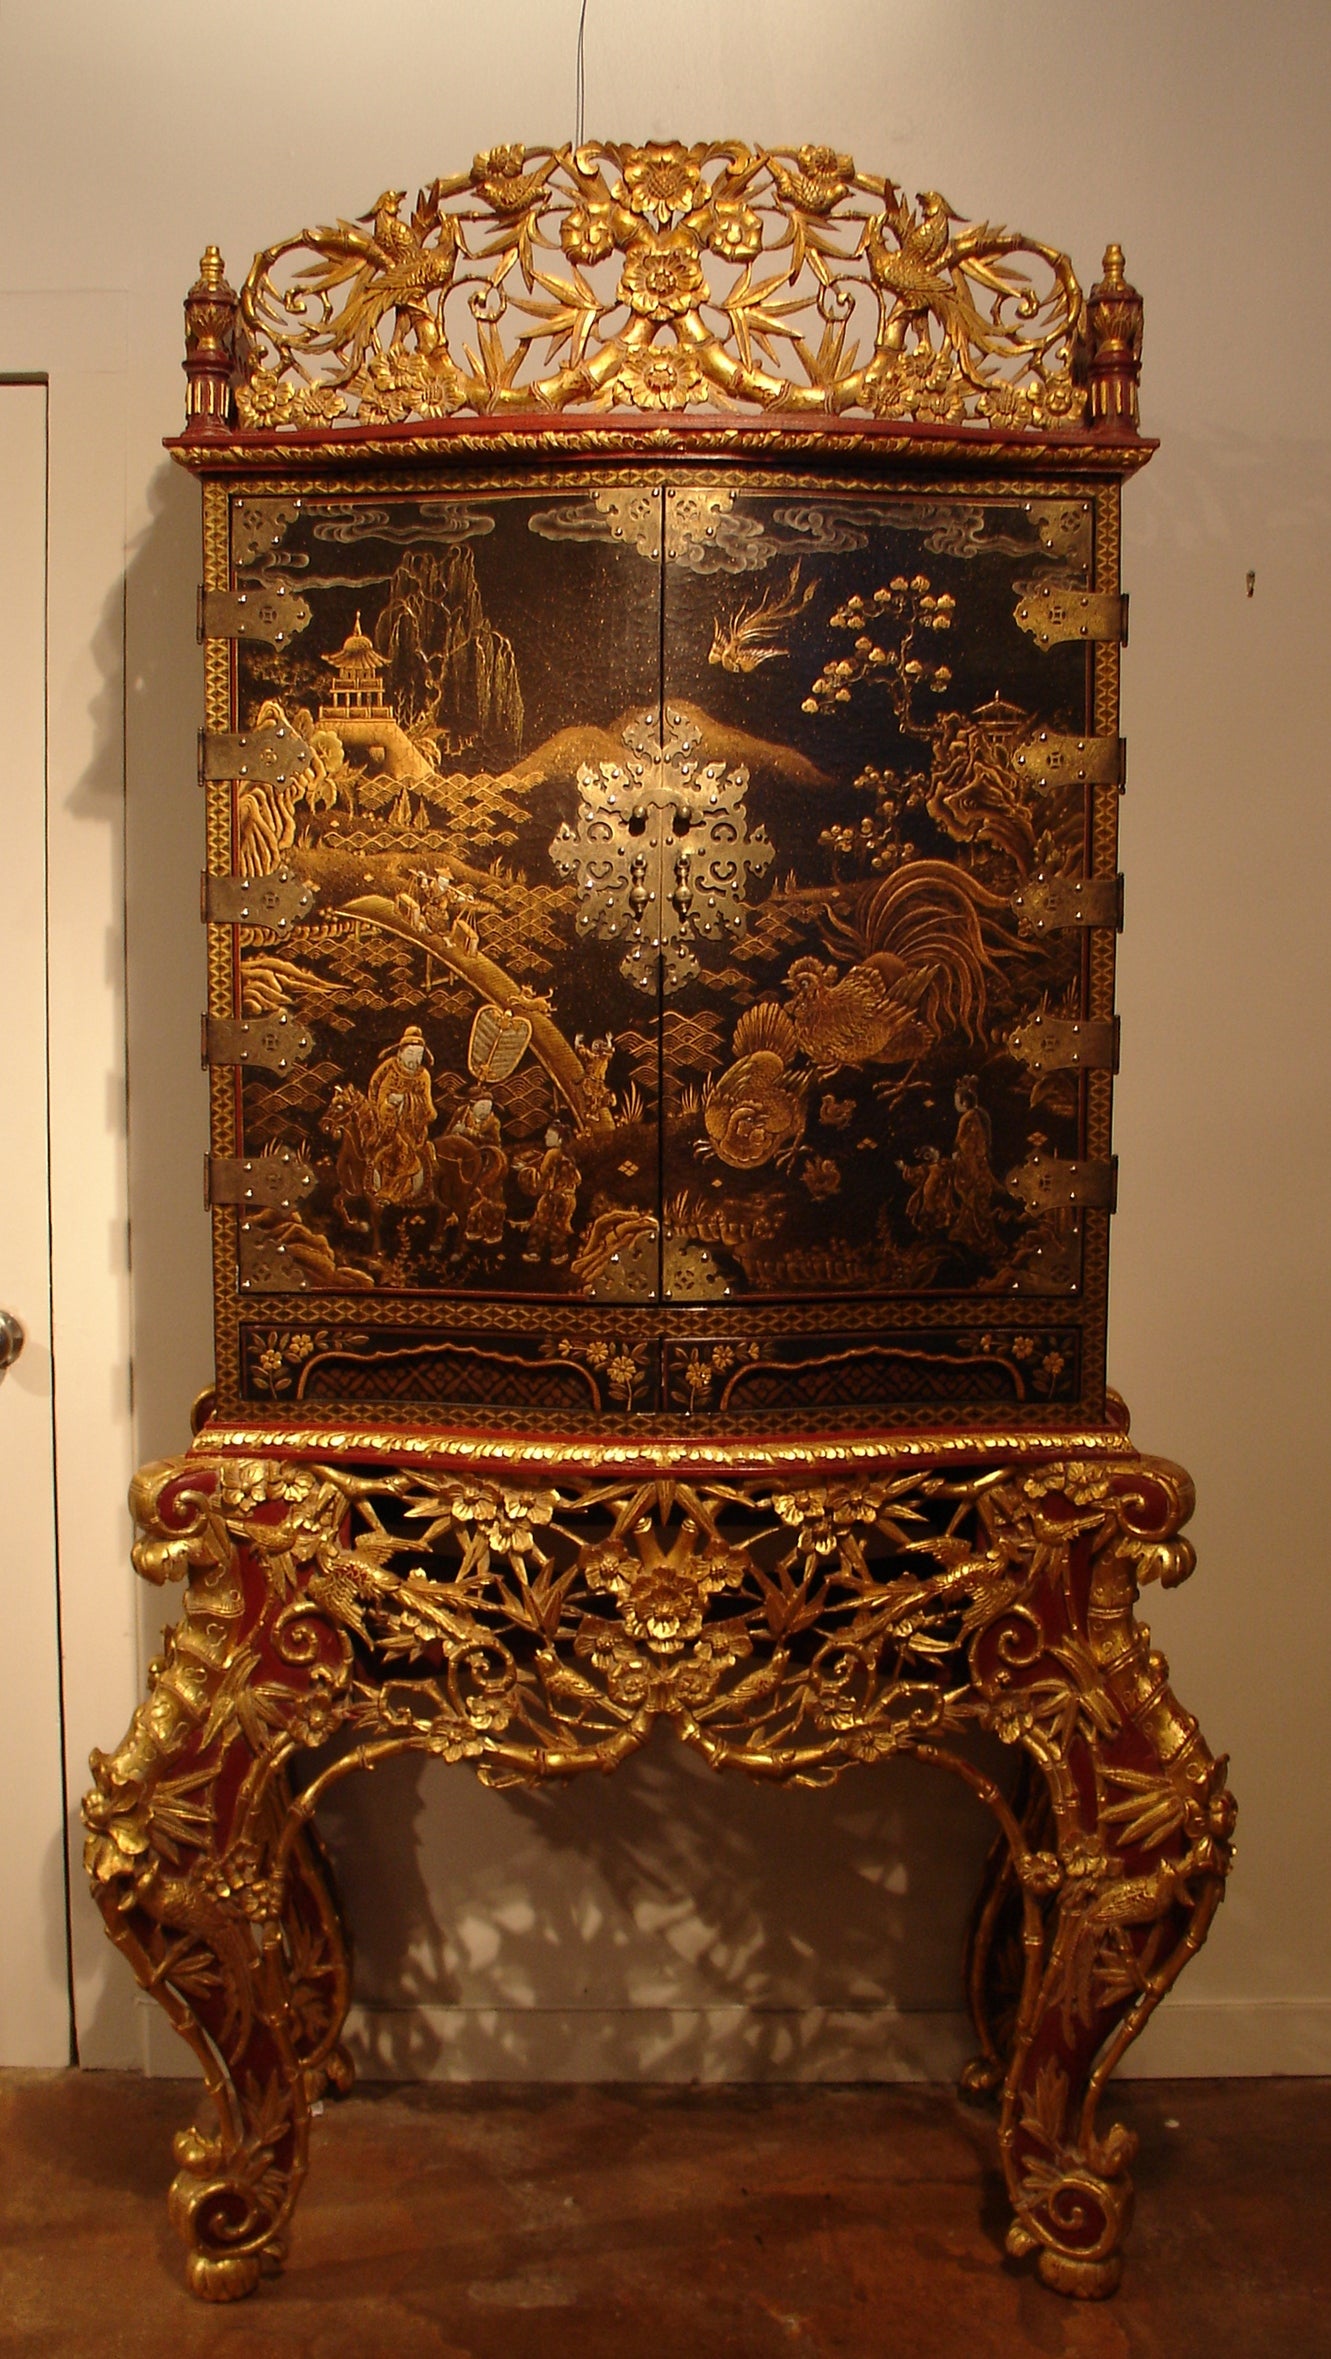 A Japanese Export Lacquer Cabinet on Peranakan Gilt Stand